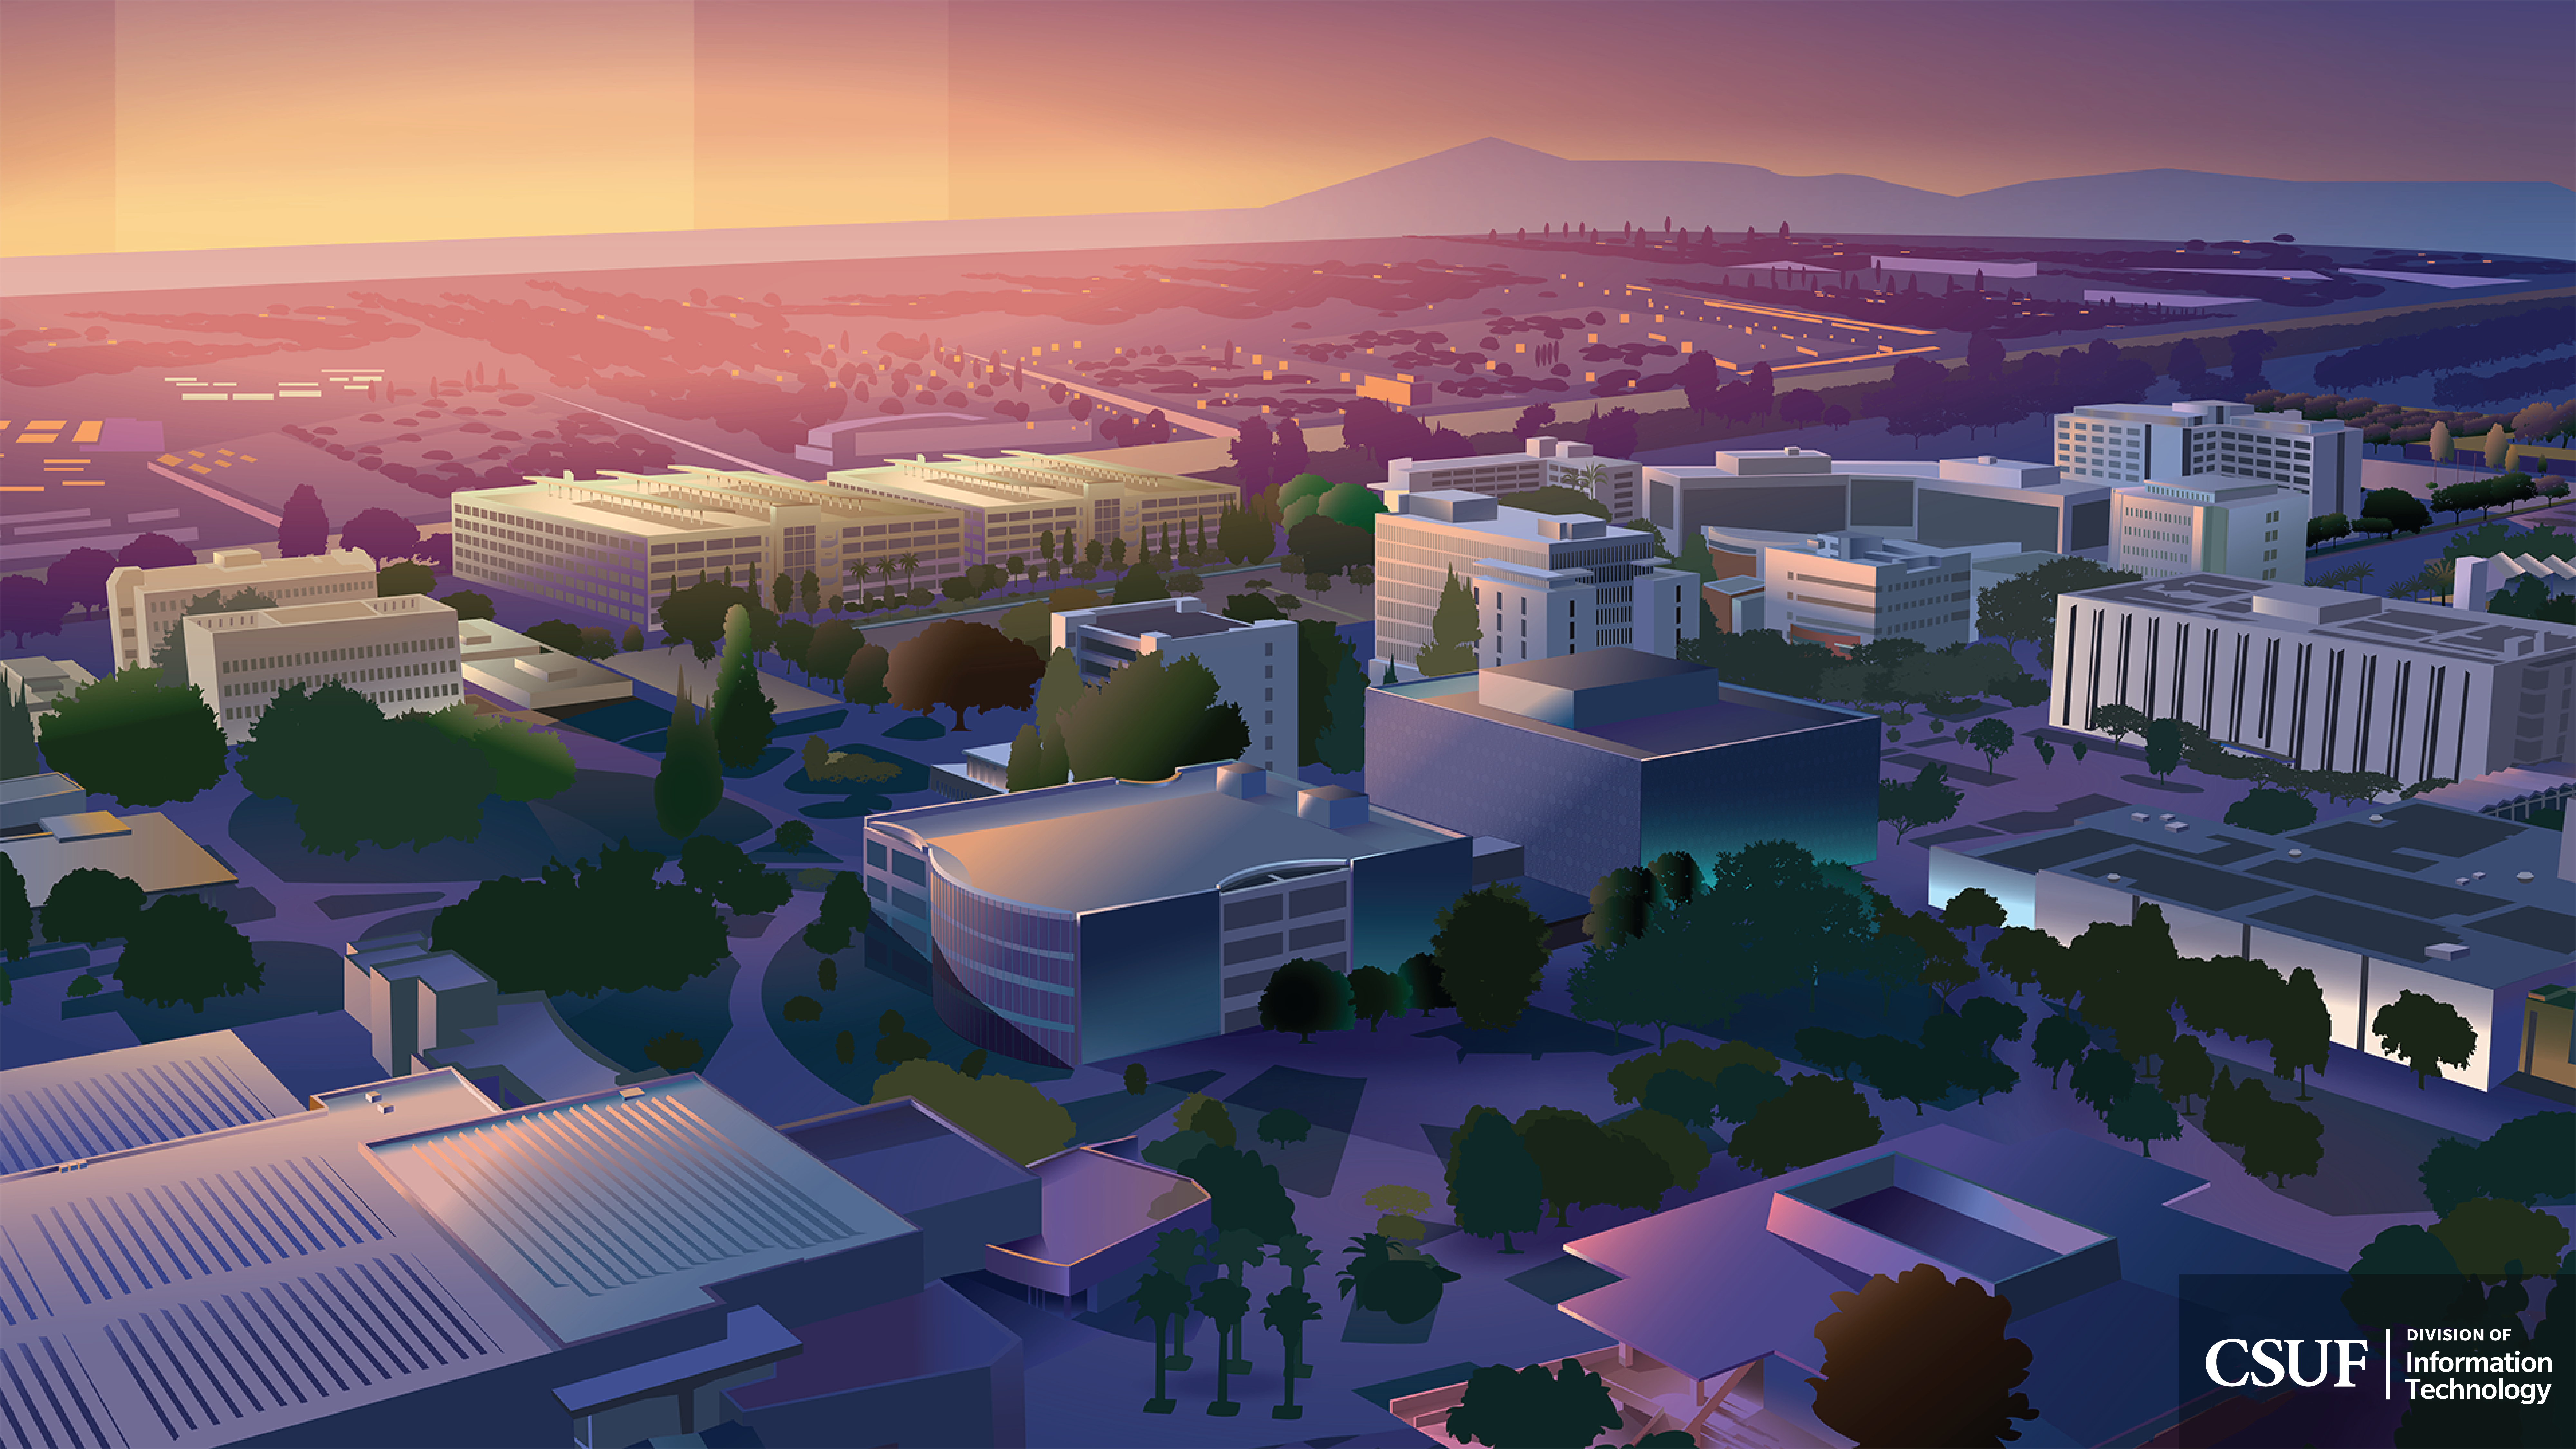 Vector drawing of an upshot of CSUF campus